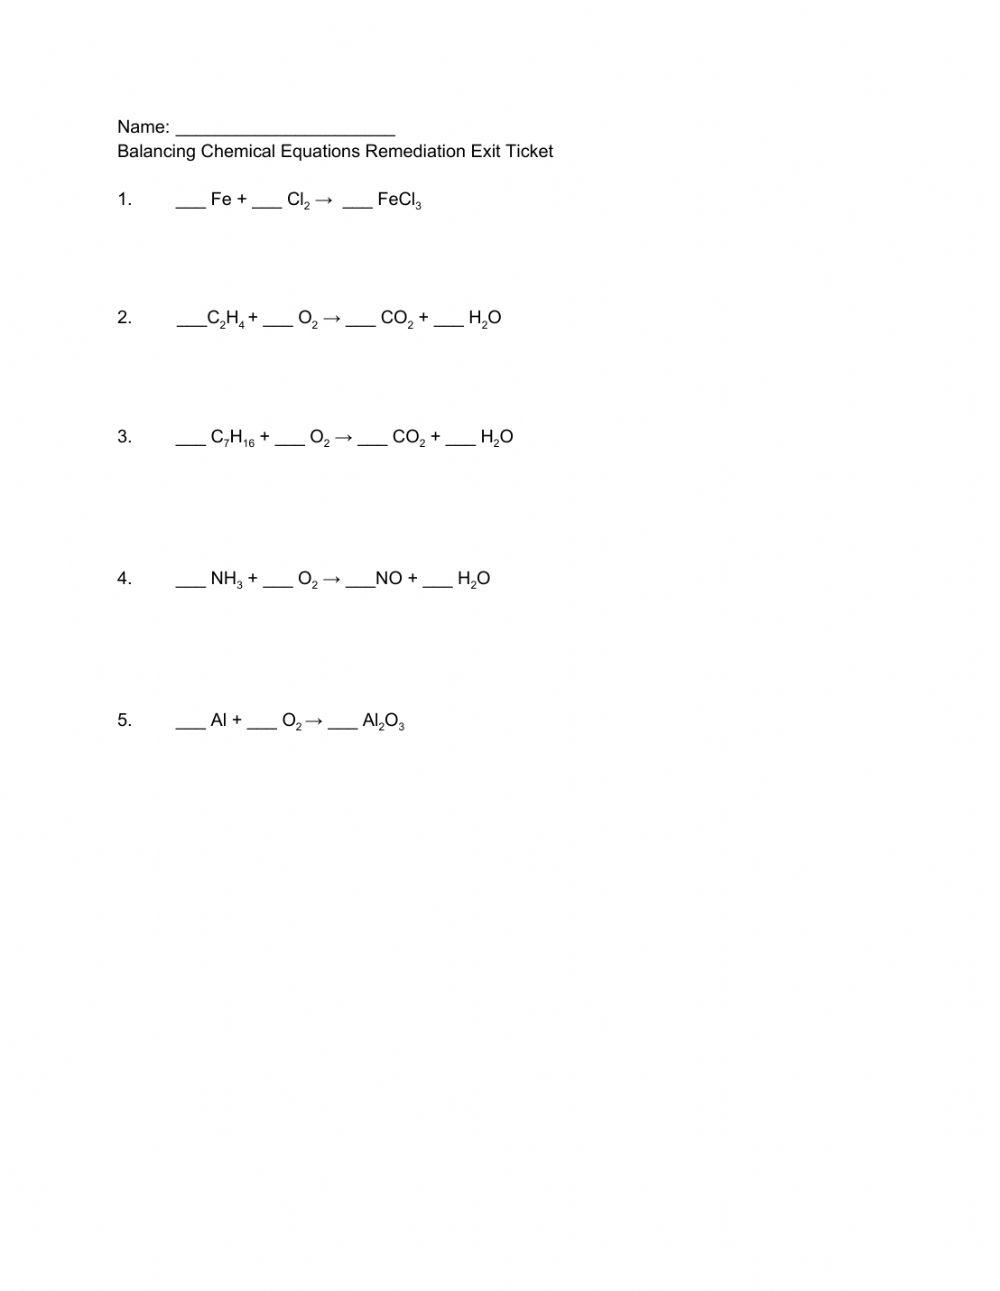 Balancing Chemical Equations Remediation Exit Ticket